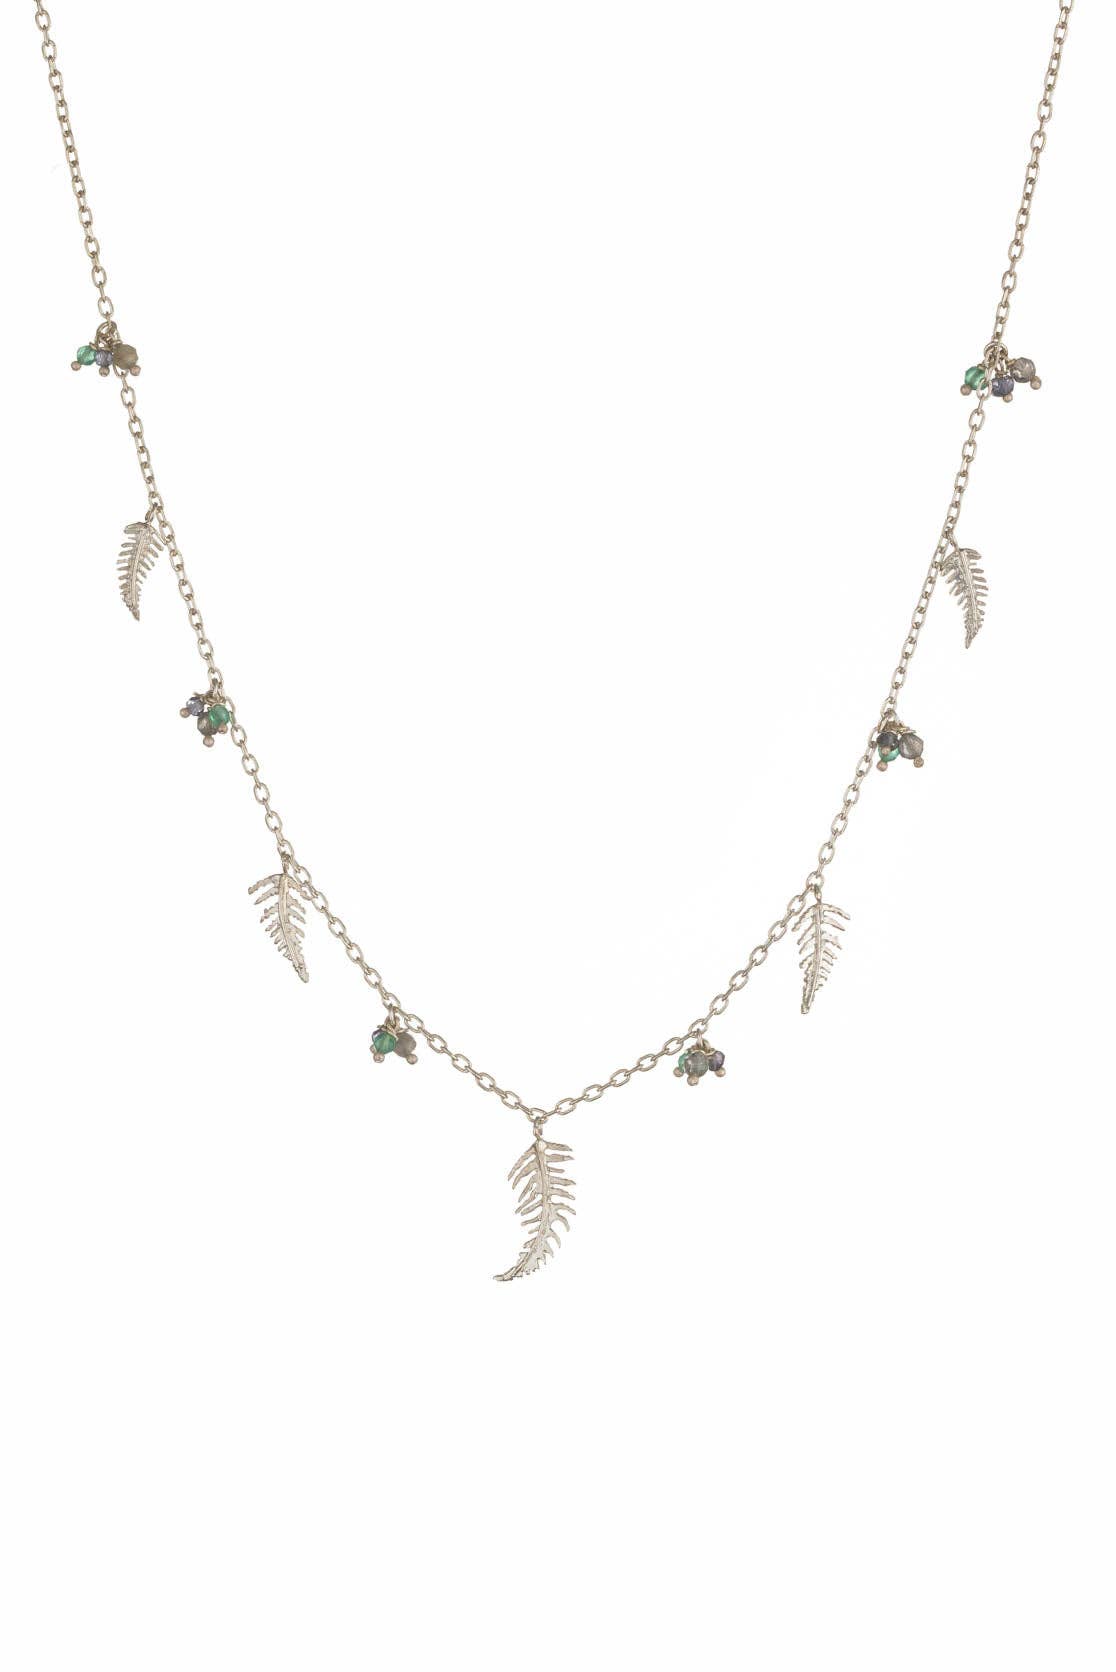 Botanical Multiple Fern Necklace in Silver